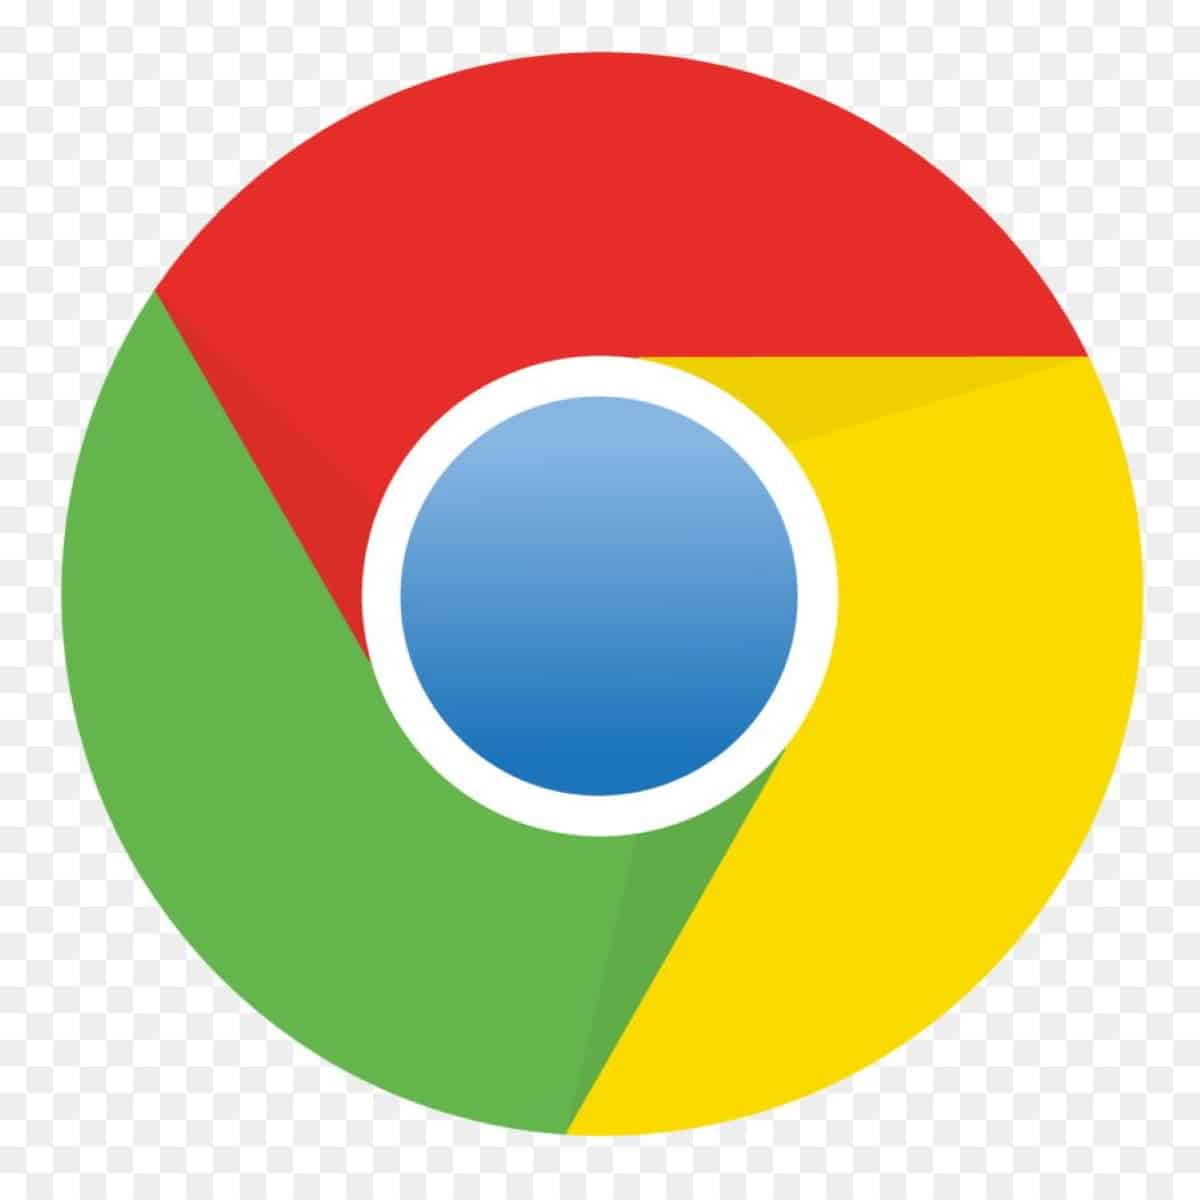 A security update for Google Chrome 96 is out